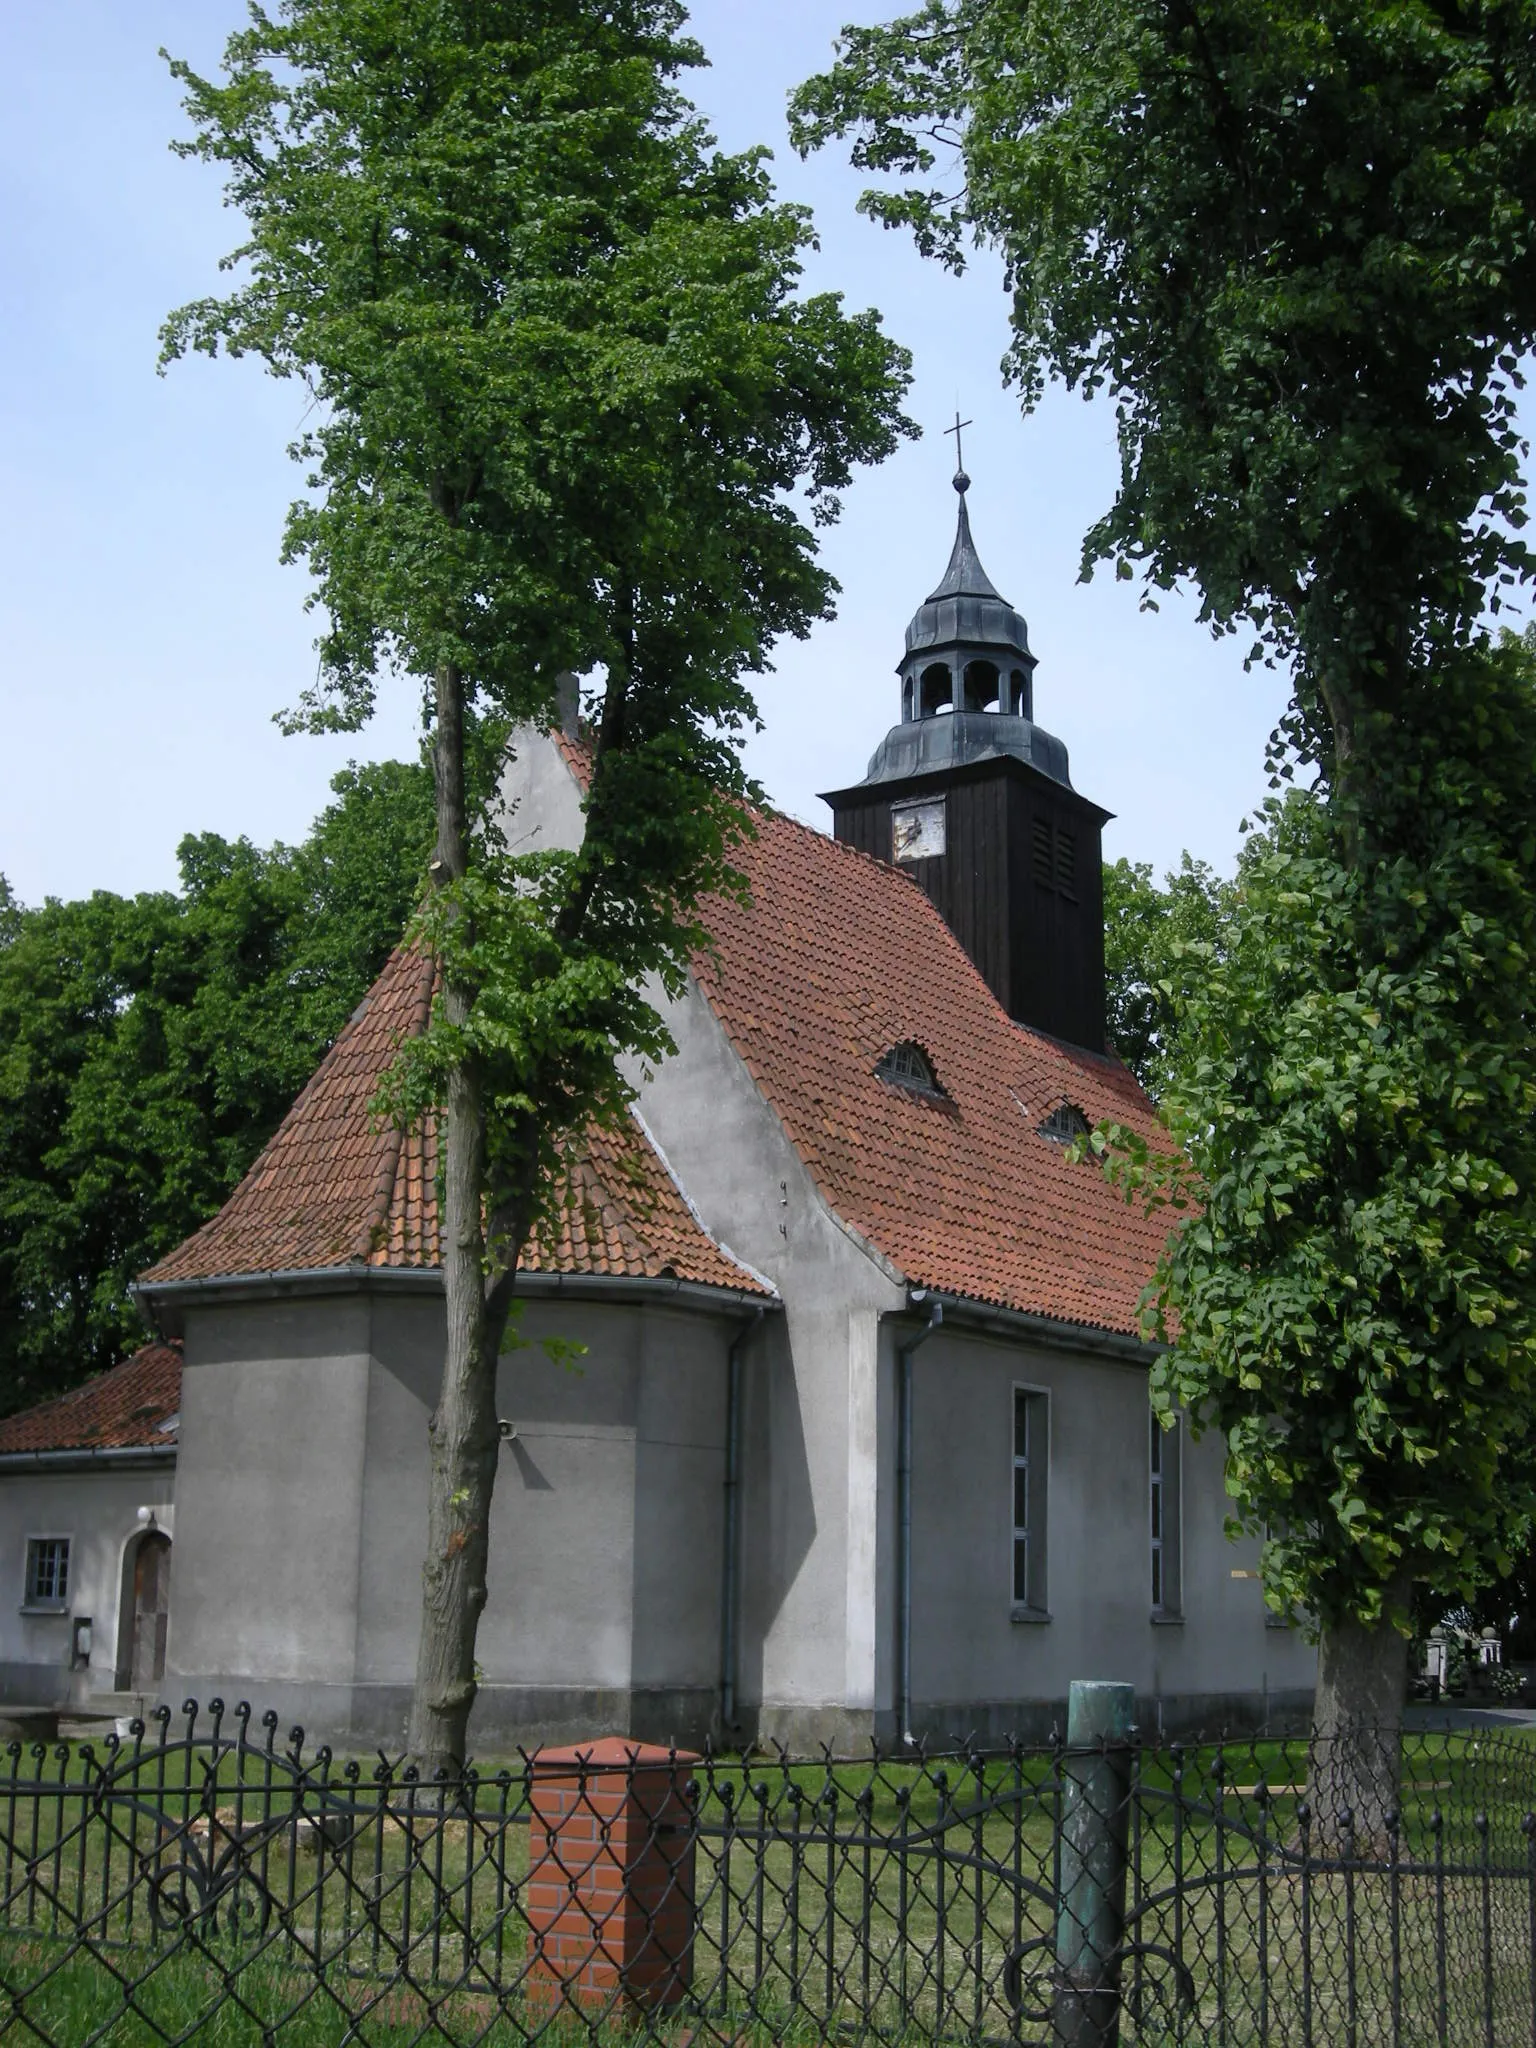 Photo showing: The church in Buszkowo, Poland.